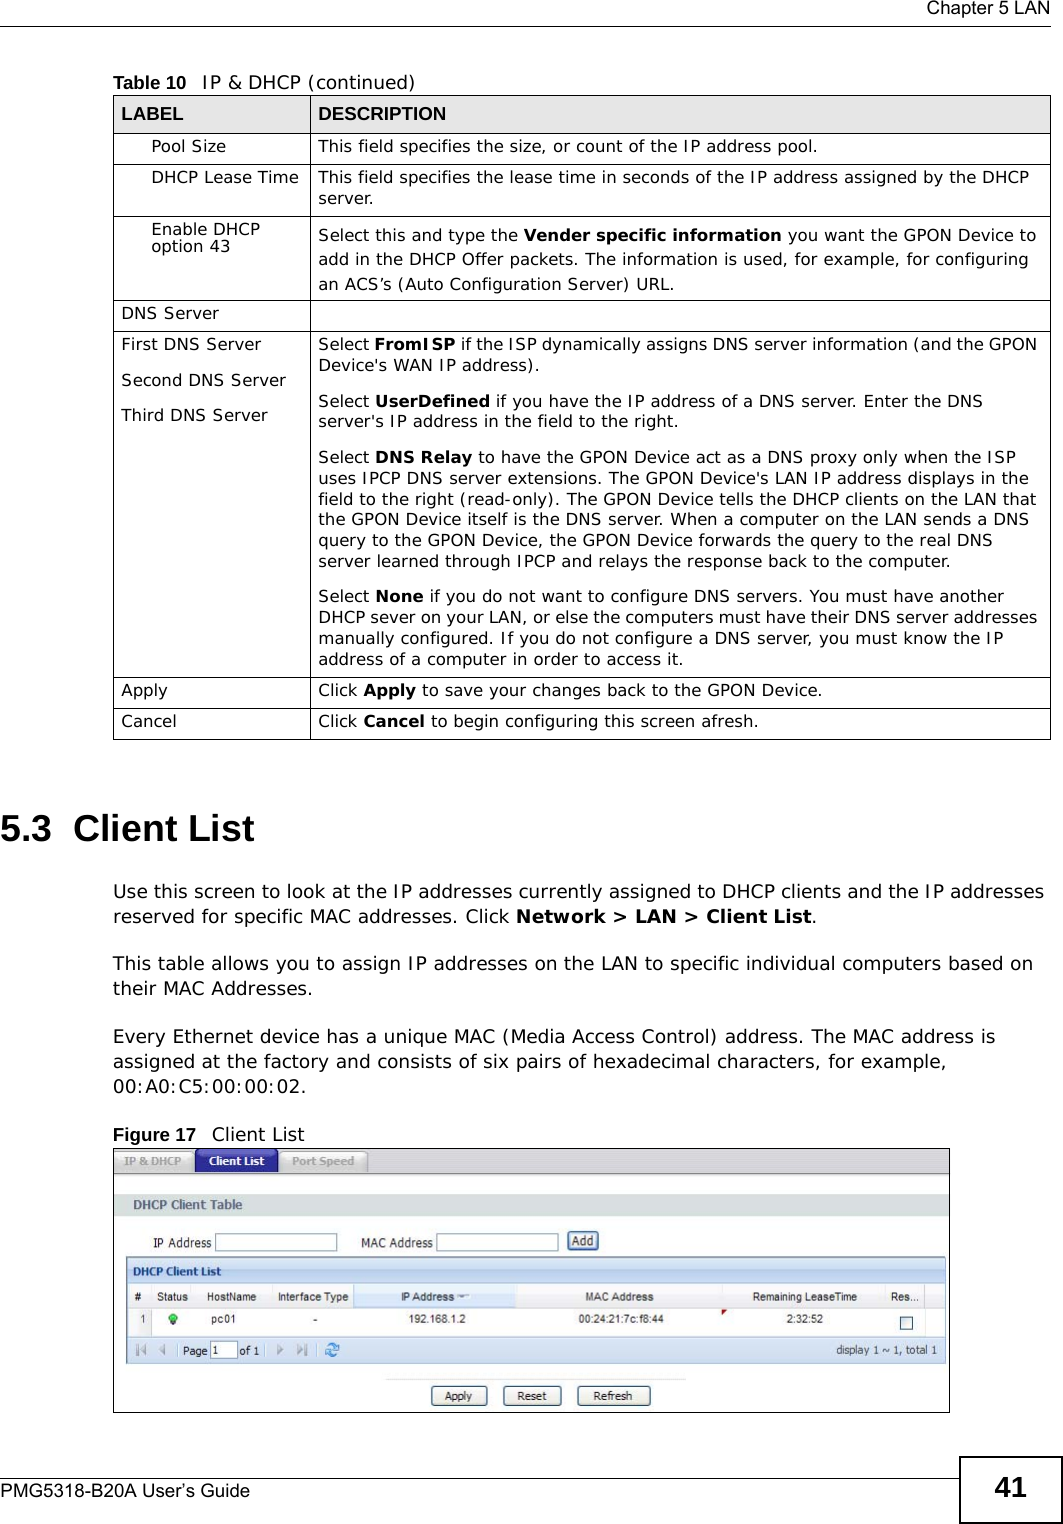  Chapter 5 LANPMG5318-B20A User’s Guide 415.3  Client ListUse this screen to look at the IP addresses currently assigned to DHCP clients and the IP addresses reserved for specific MAC addresses. Click Network &gt; LAN &gt; Client List.This table allows you to assign IP addresses on the LAN to specific individual computers based on their MAC Addresses. Every Ethernet device has a unique MAC (Media Access Control) address. The MAC address is assigned at the factory and consists of six pairs of hexadecimal characters, for example, 00:A0:C5:00:00:02.Figure 17   Client List  Pool Size This field specifies the size, or count of the IP address pool.DHCP Lease Time This field specifies the lease time in seconds of the IP address assigned by the DHCP server.Enable DHCP option 43 Select this and type the Vender specific information you want the GPON Device to add in the DHCP Offer packets. The information is used, for example, for configuring an ACS’s (Auto Configuration Server) URL.DNS ServerFirst DNS ServerSecond DNS ServerThird DNS ServerSelect FromISP if the ISP dynamically assigns DNS server information (and the GPON Device&apos;s WAN IP address).Select UserDefined if you have the IP address of a DNS server. Enter the DNS server&apos;s IP address in the field to the right.Select DNS Relay to have the GPON Device act as a DNS proxy only when the ISP uses IPCP DNS server extensions. The GPON Device&apos;s LAN IP address displays in the field to the right (read-only). The GPON Device tells the DHCP clients on the LAN that the GPON Device itself is the DNS server. When a computer on the LAN sends a DNS query to the GPON Device, the GPON Device forwards the query to the real DNS server learned through IPCP and relays the response back to the computer.Select None if you do not want to configure DNS servers. You must have another DHCP sever on your LAN, or else the computers must have their DNS server addresses manually configured. If you do not configure a DNS server, you must know the IP address of a computer in order to access it.Apply Click Apply to save your changes back to the GPON Device.Cancel Click Cancel to begin configuring this screen afresh.Table 10   IP &amp; DHCP (continued)LABEL DESCRIPTION